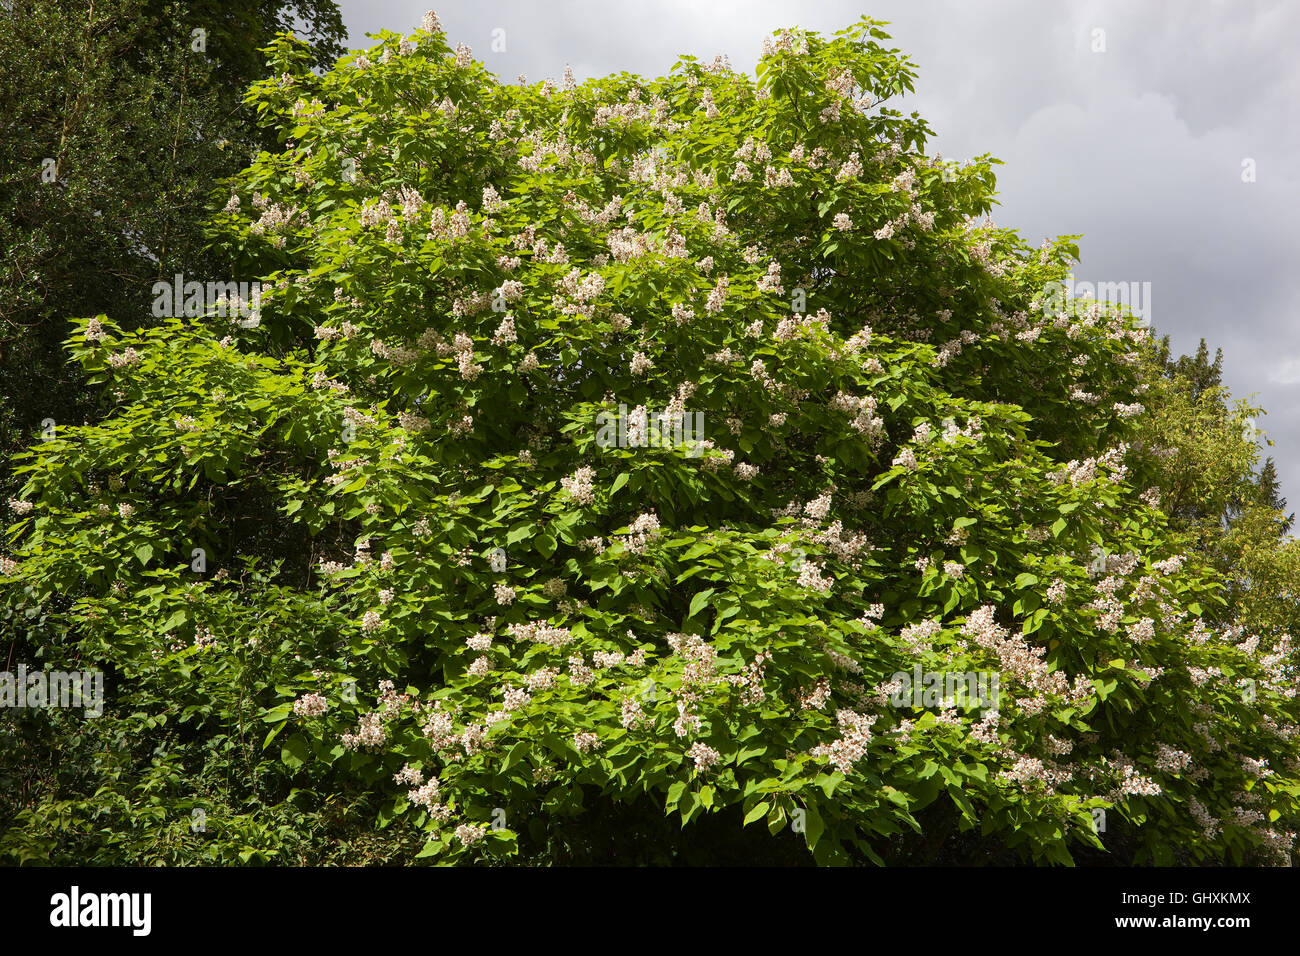 An Indian bean tree, Catalpa bignonioides, in full flower under a cloudy sky in summertime. Stock Photo